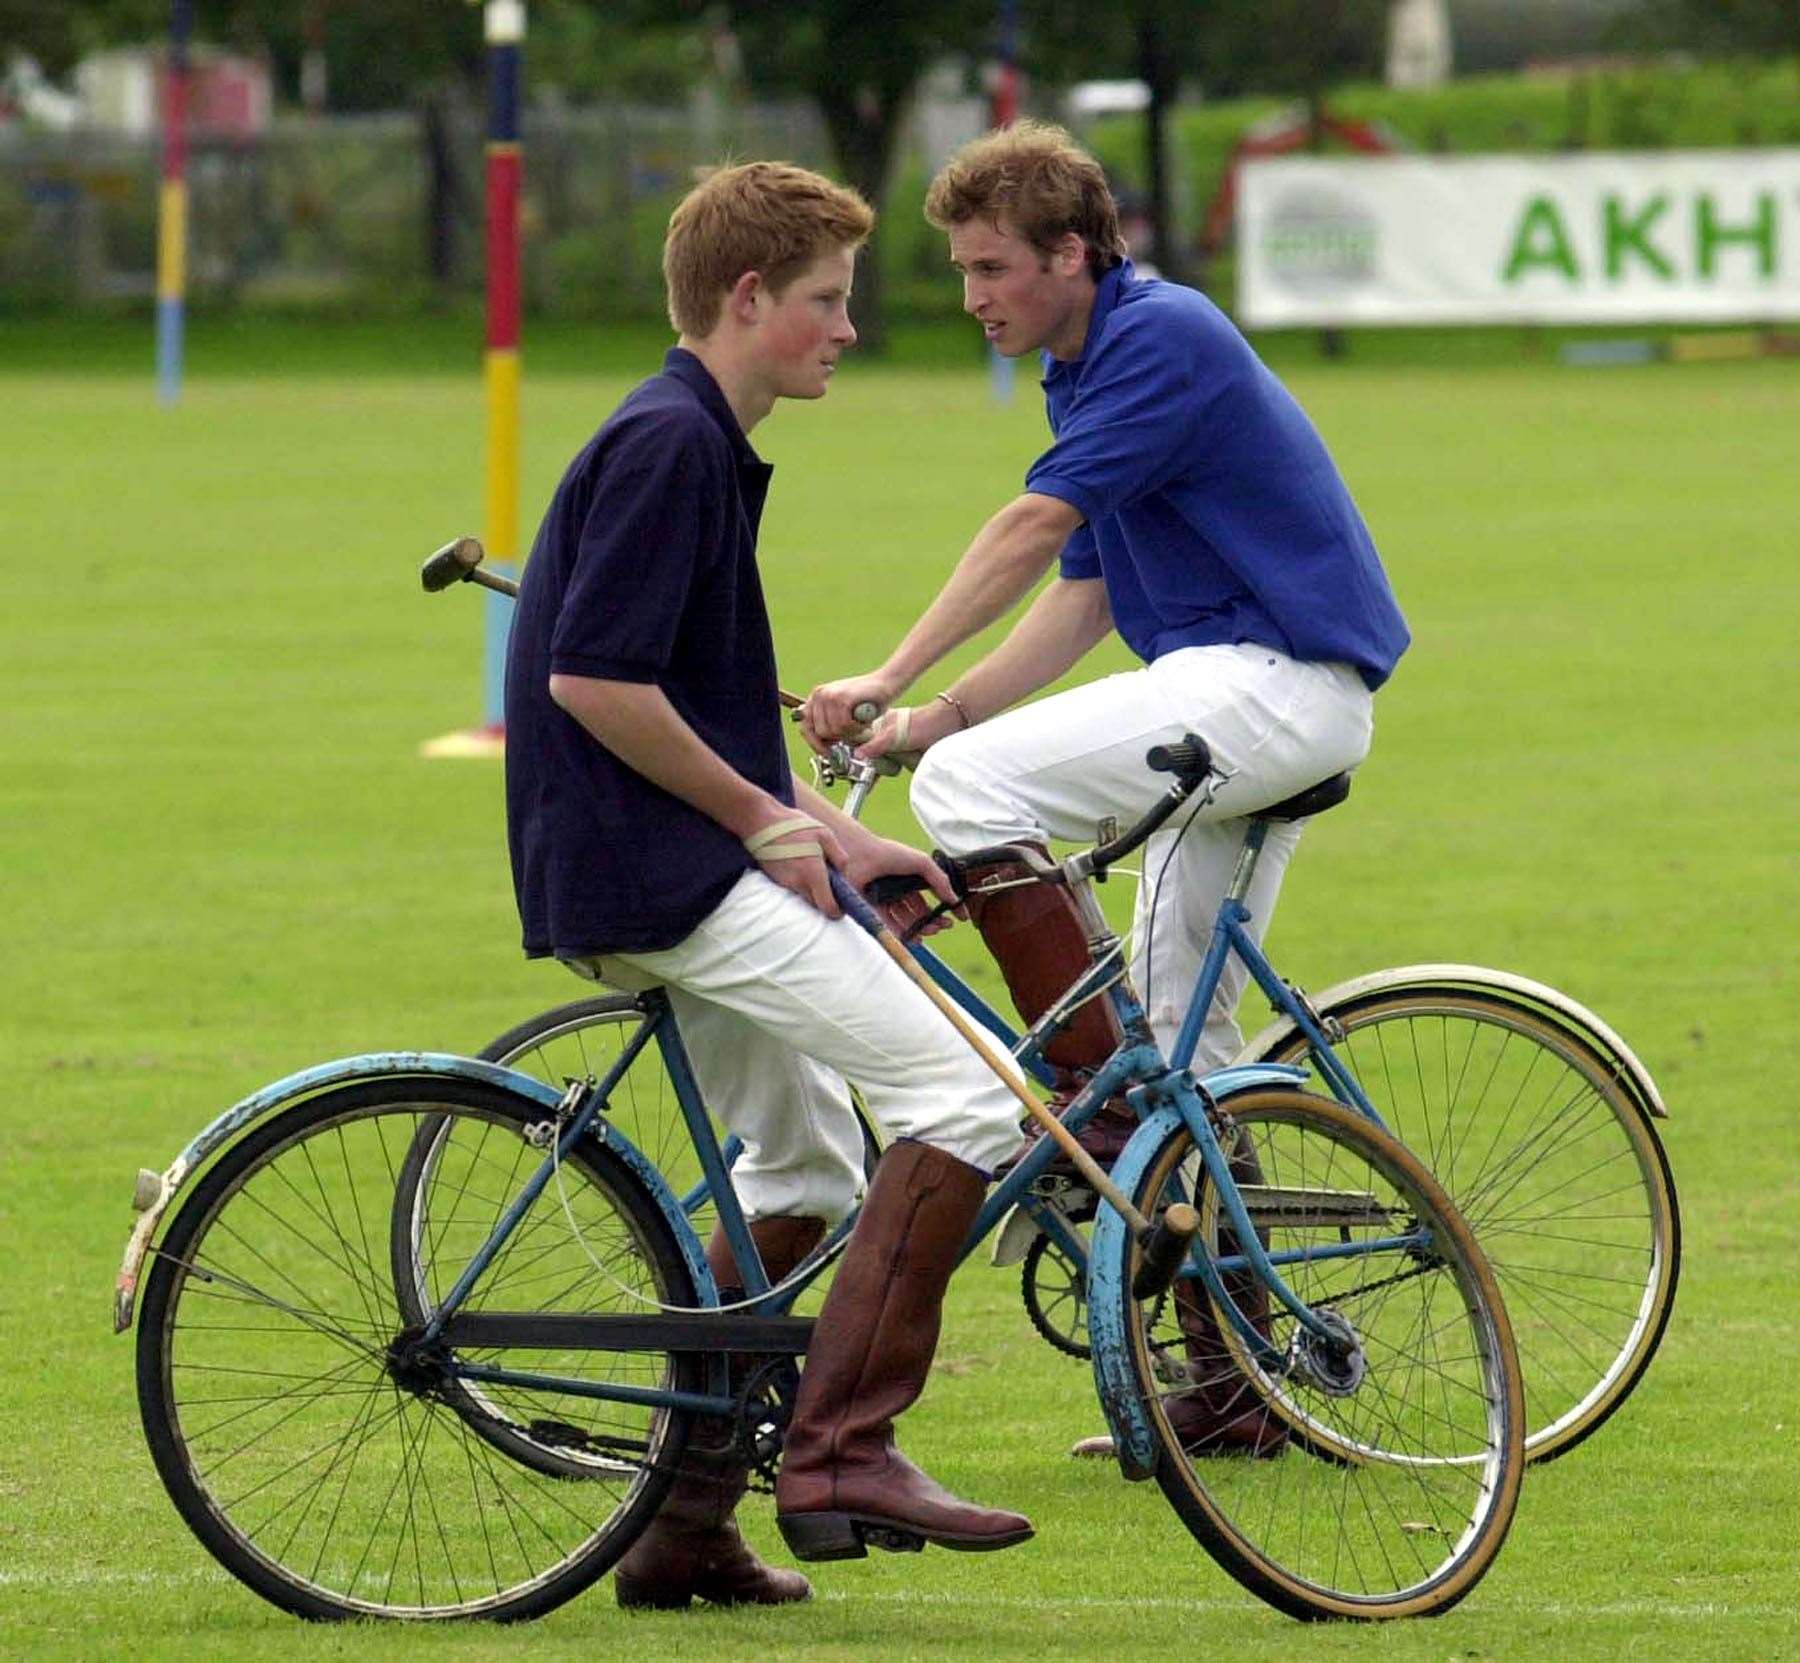 Prince Harry and Prince William take a break while playing in the bicycle part of the Jockeys v Eventers charity polo match in 2002 (Barry Batchelor/PA)